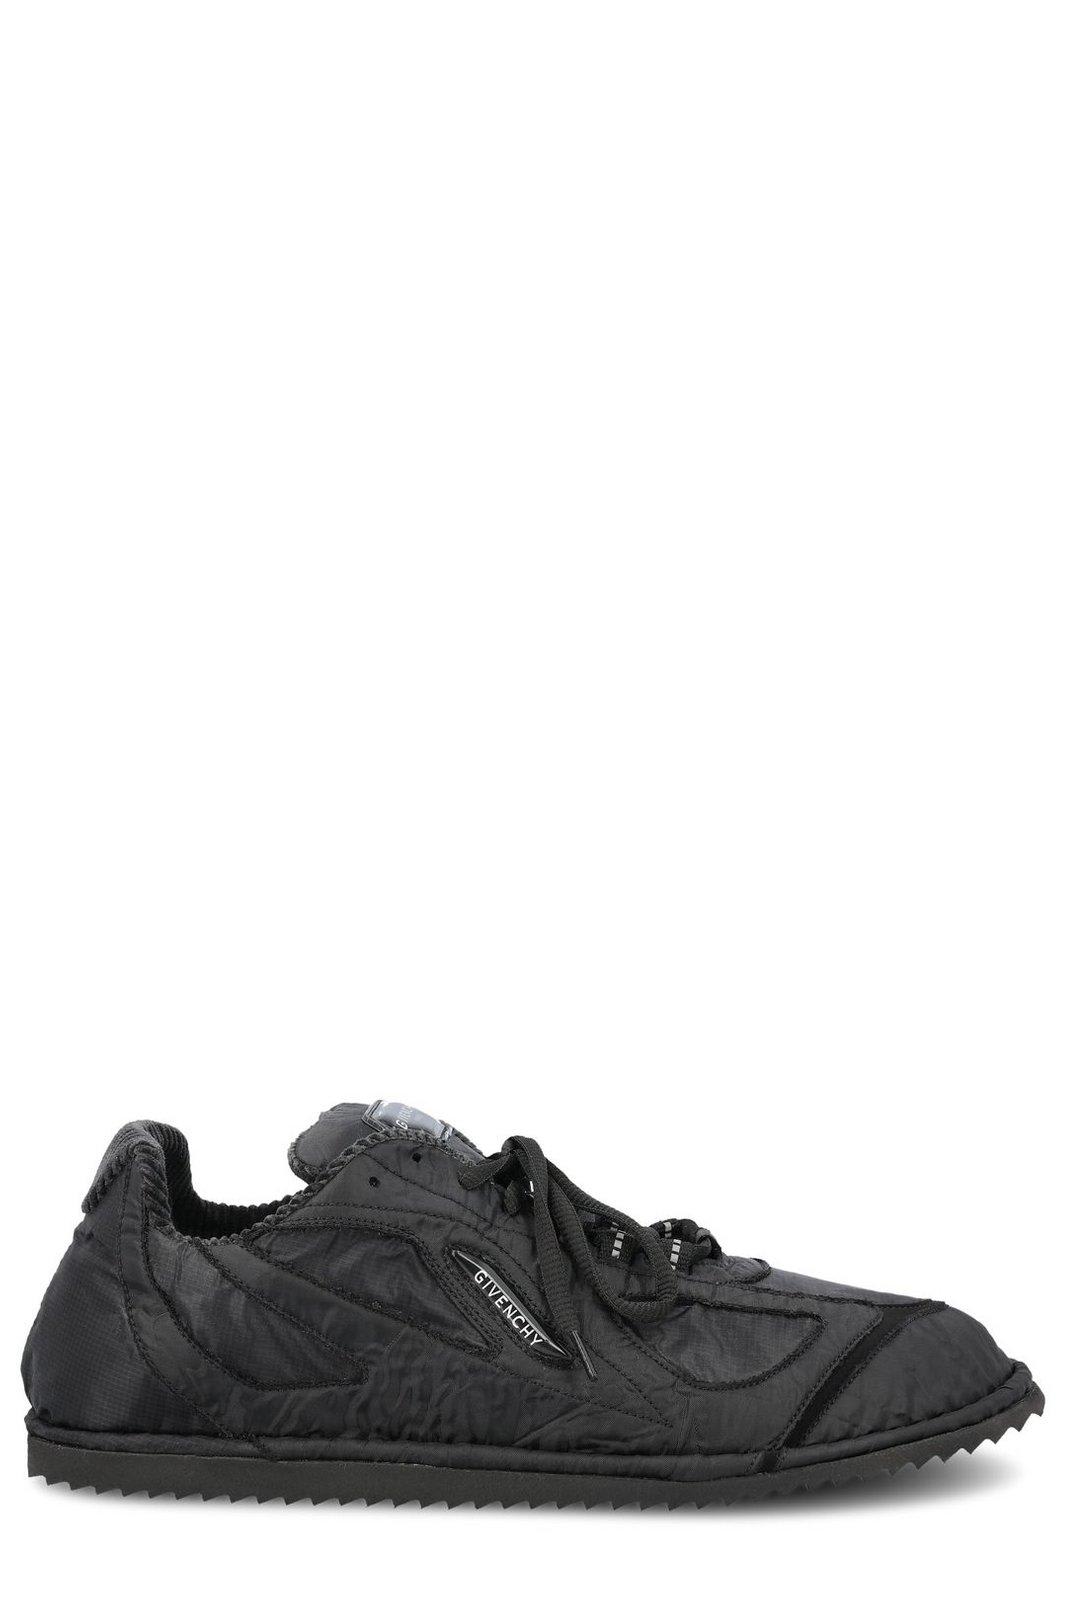 GIVENCHY LOGO PATCH LOW-TOP SNEAKERS